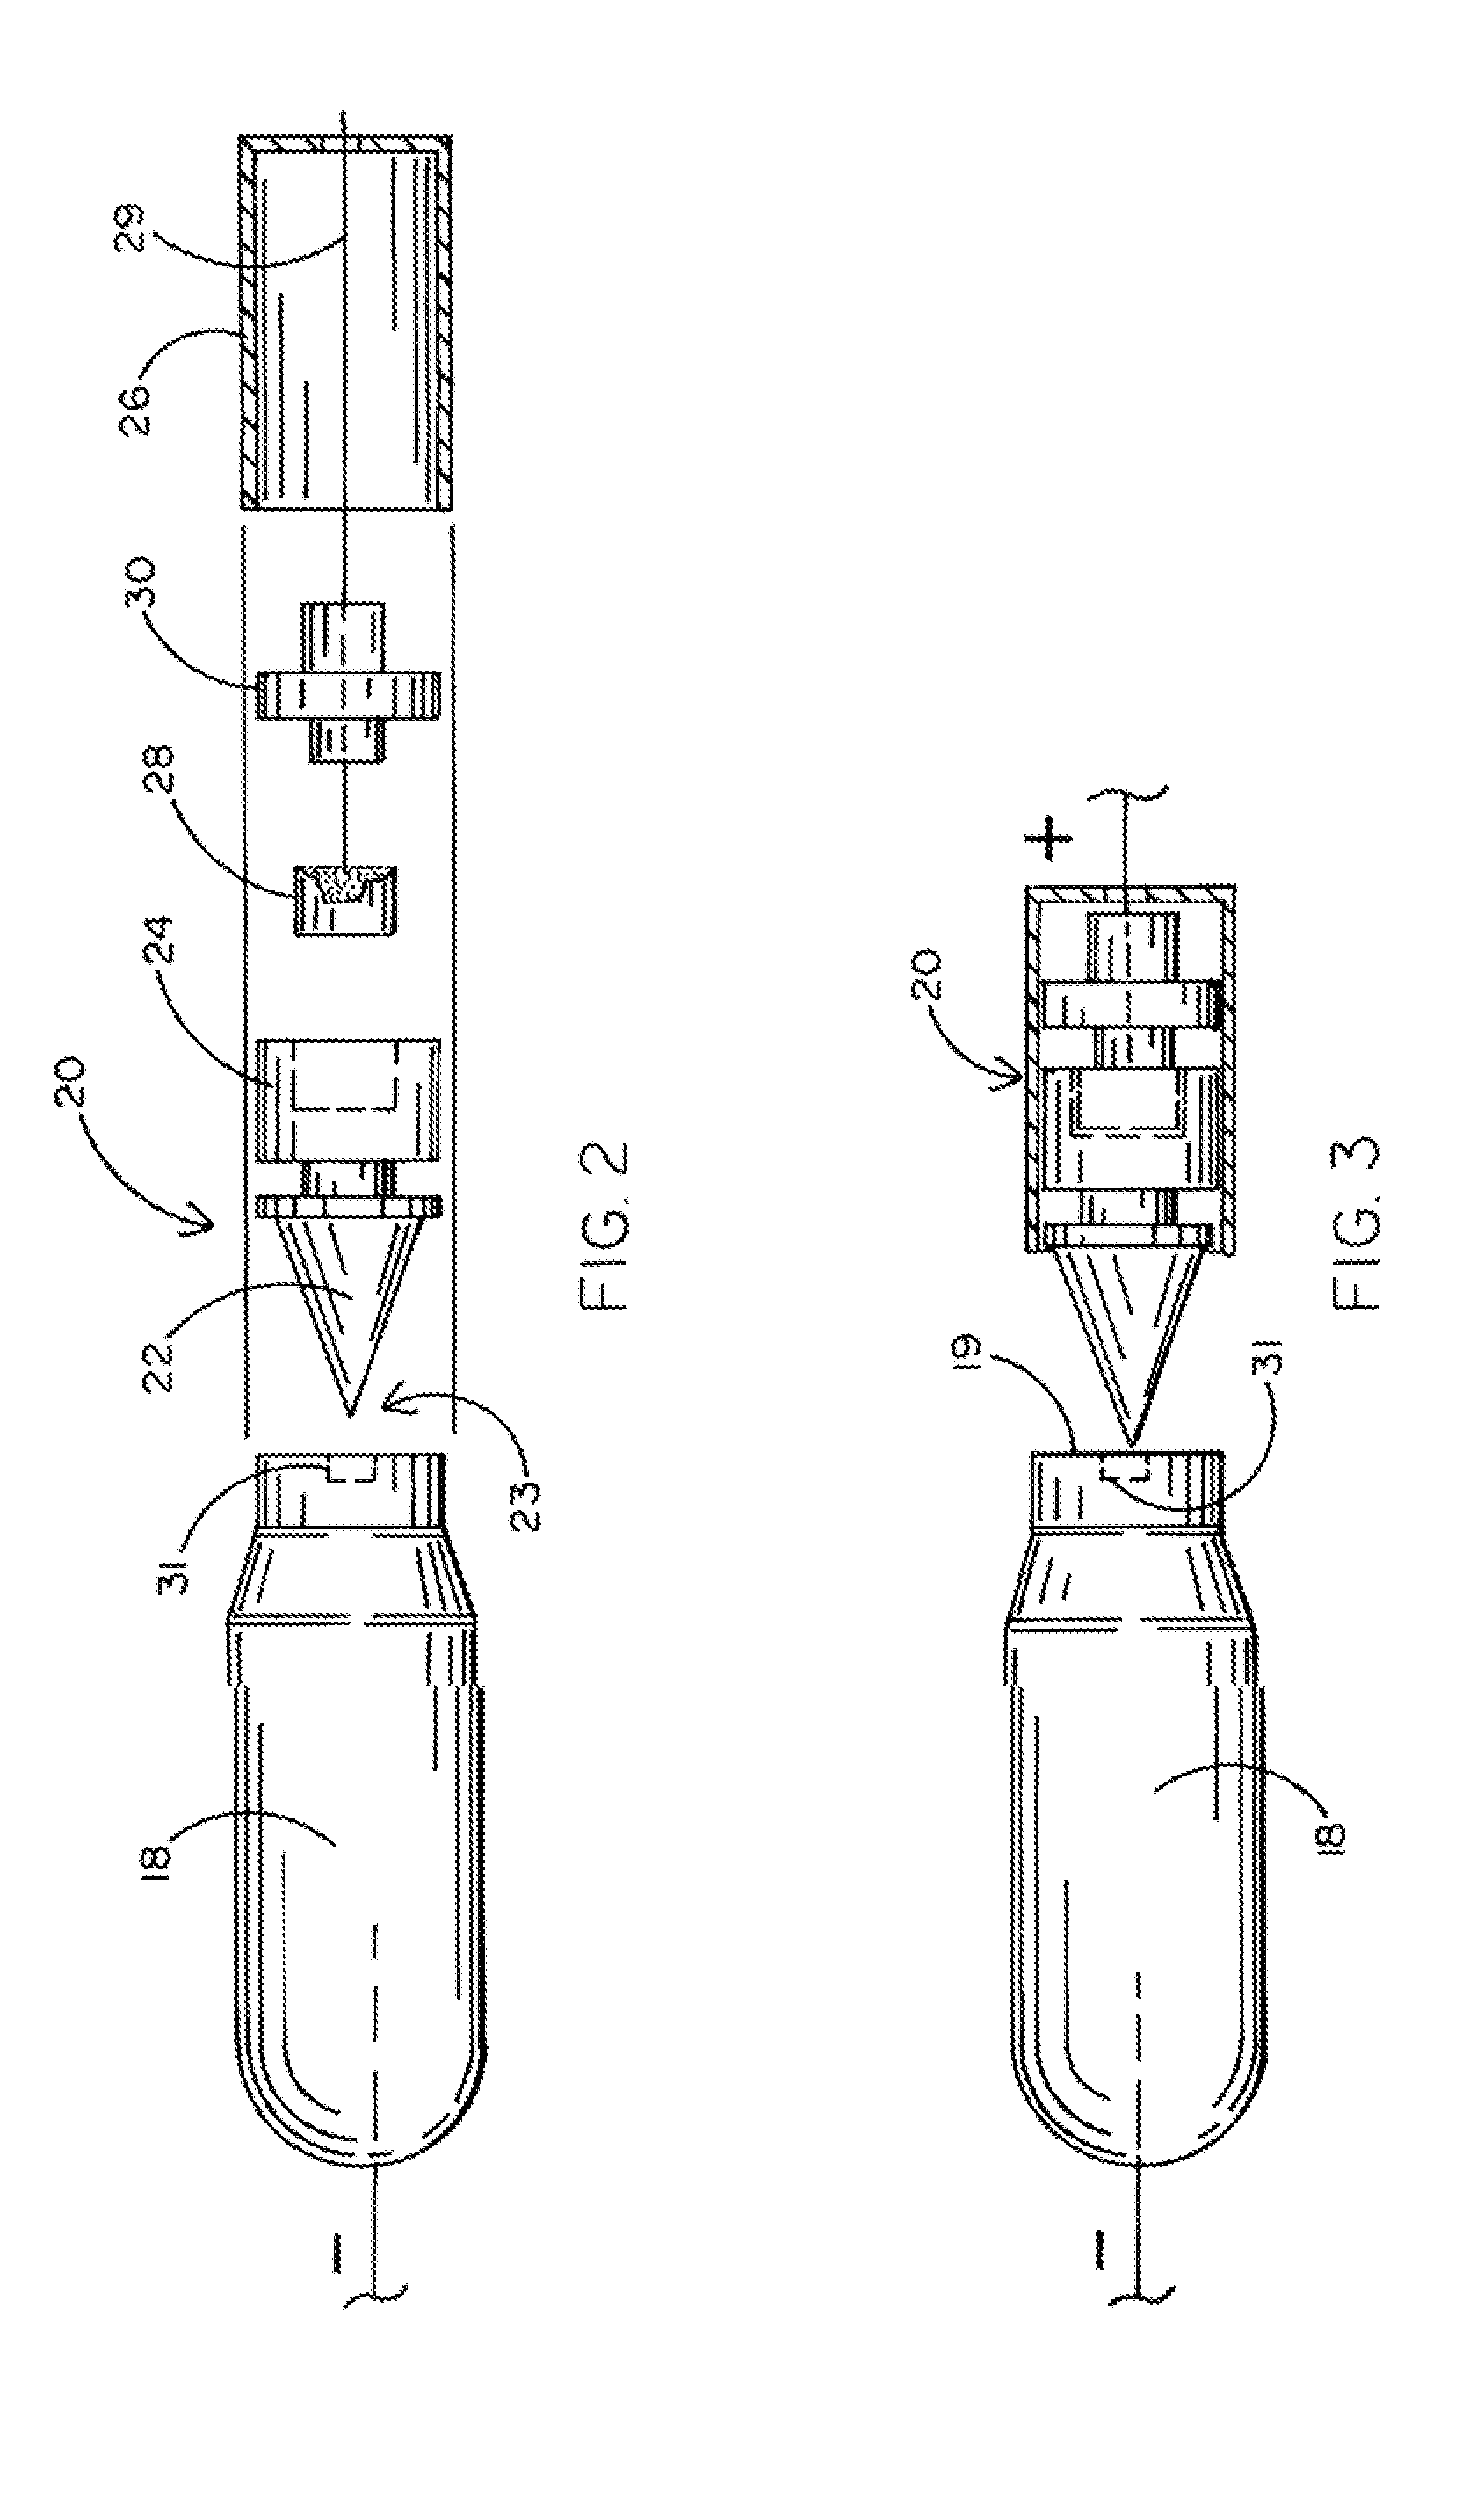 Propulsion assembly for a dart-based electrical discharge weapon